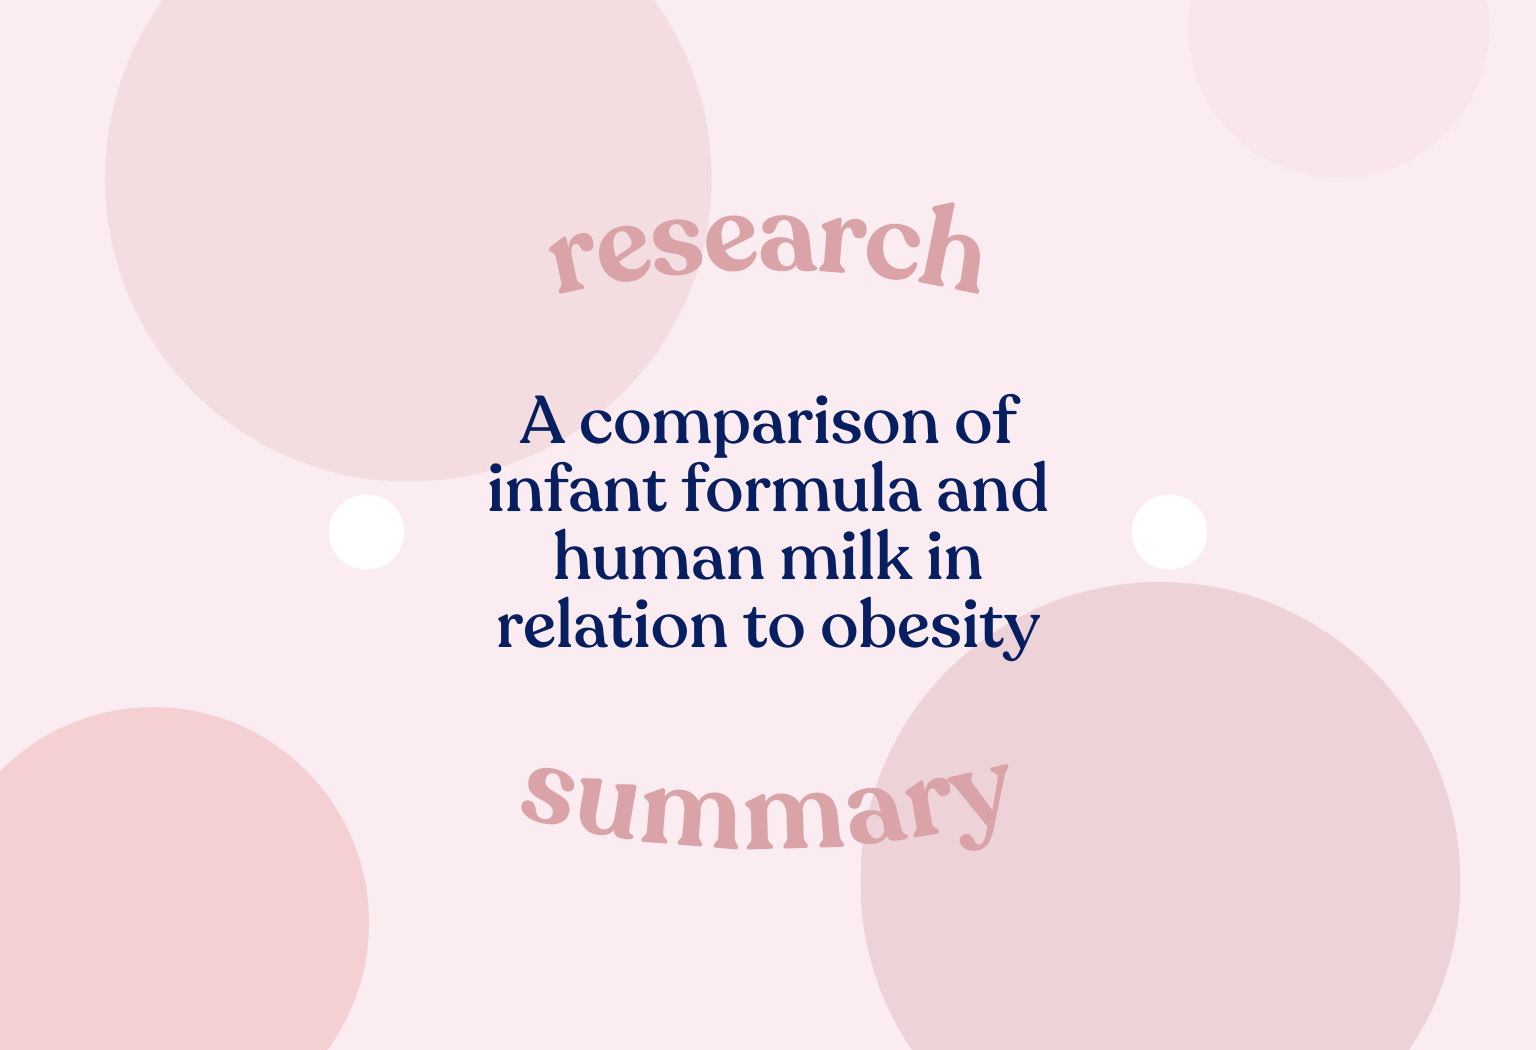 A comparison of infant formula and human milk in relation to obesity